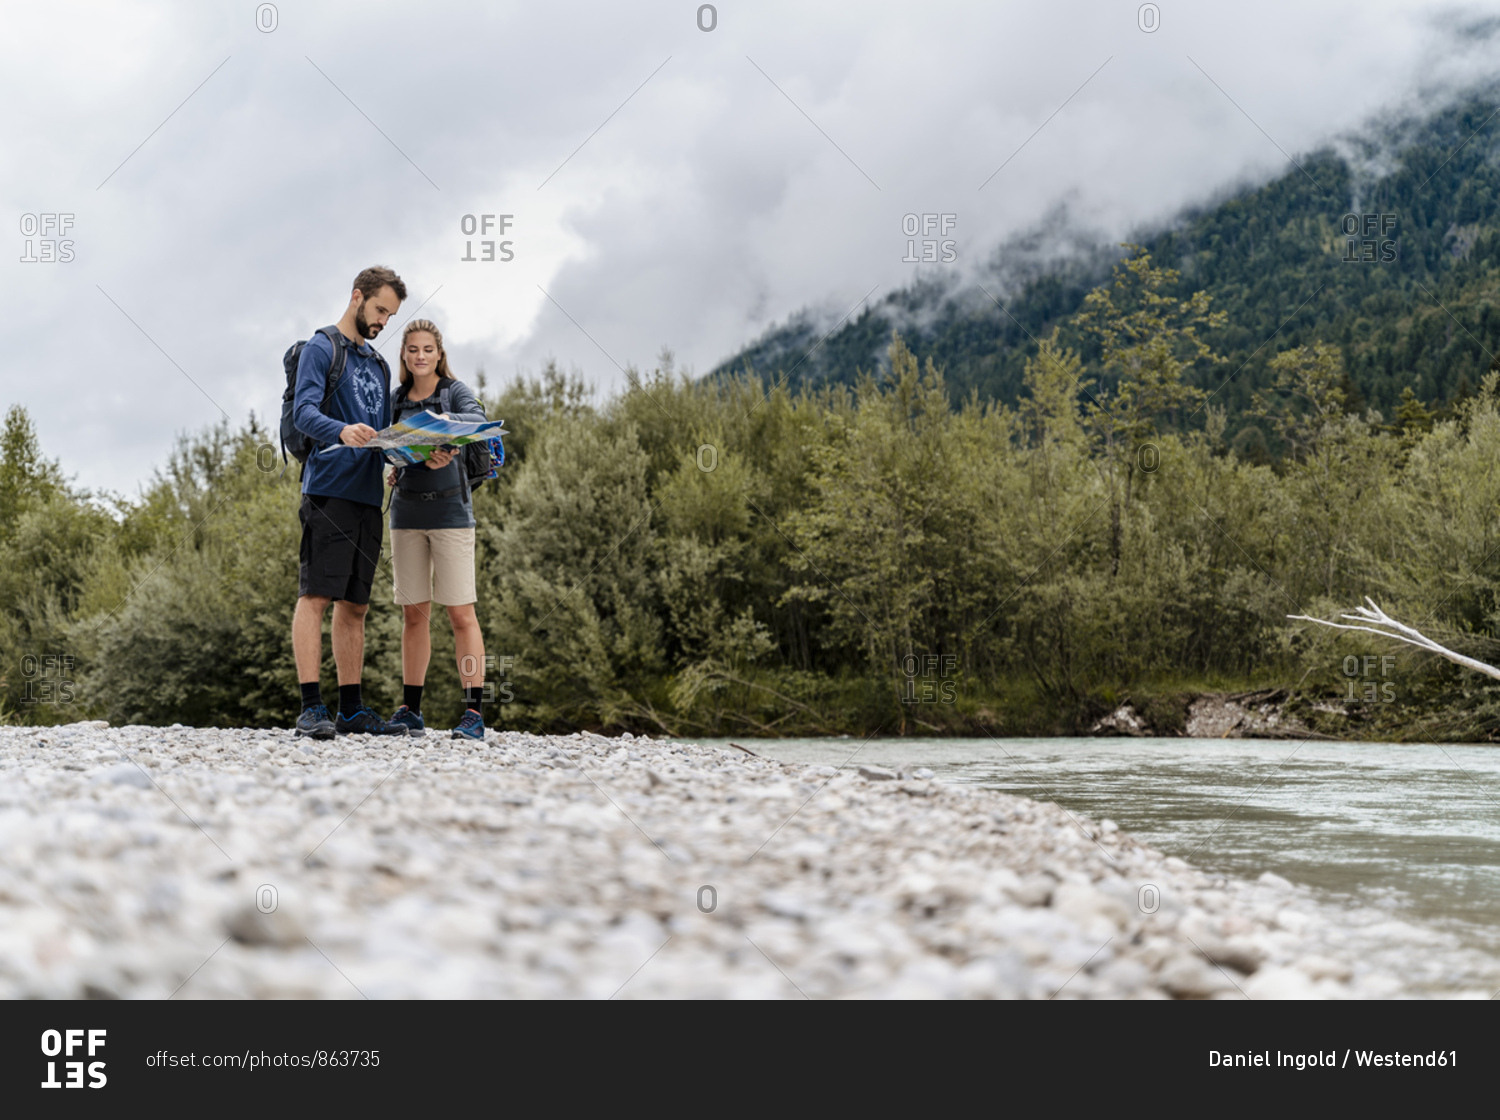 Young couple on a hiking trip at riverside reading map- Vorderriss- Bavaria- Germany